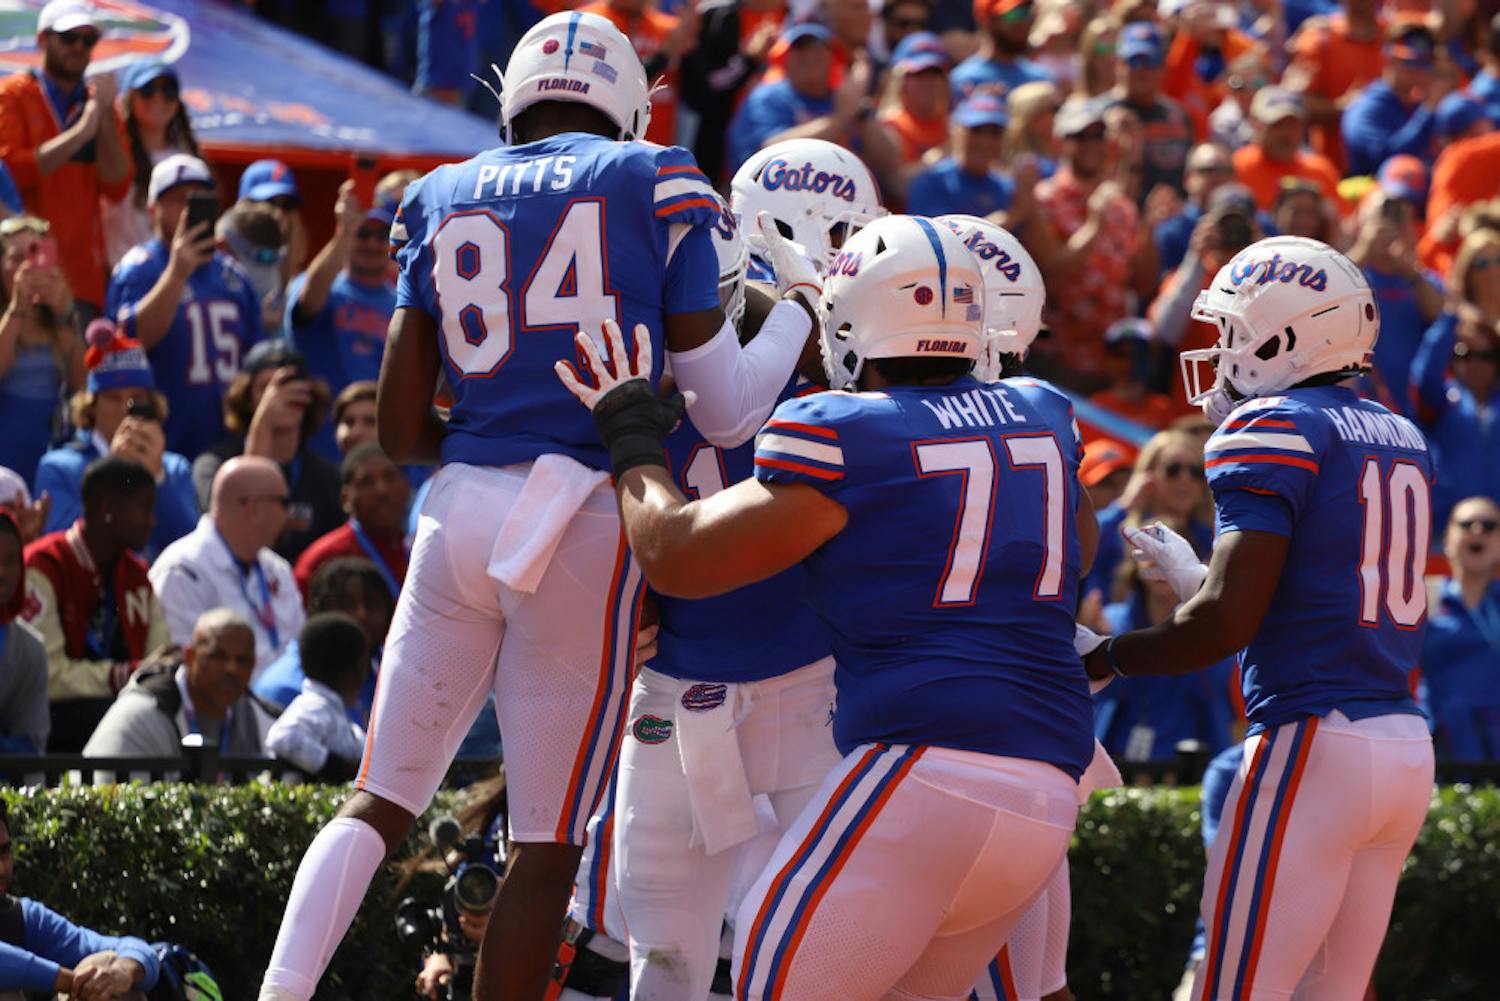 Saturday's win over Vanderbilt was UF's largest against an SEC opponent since 2008.